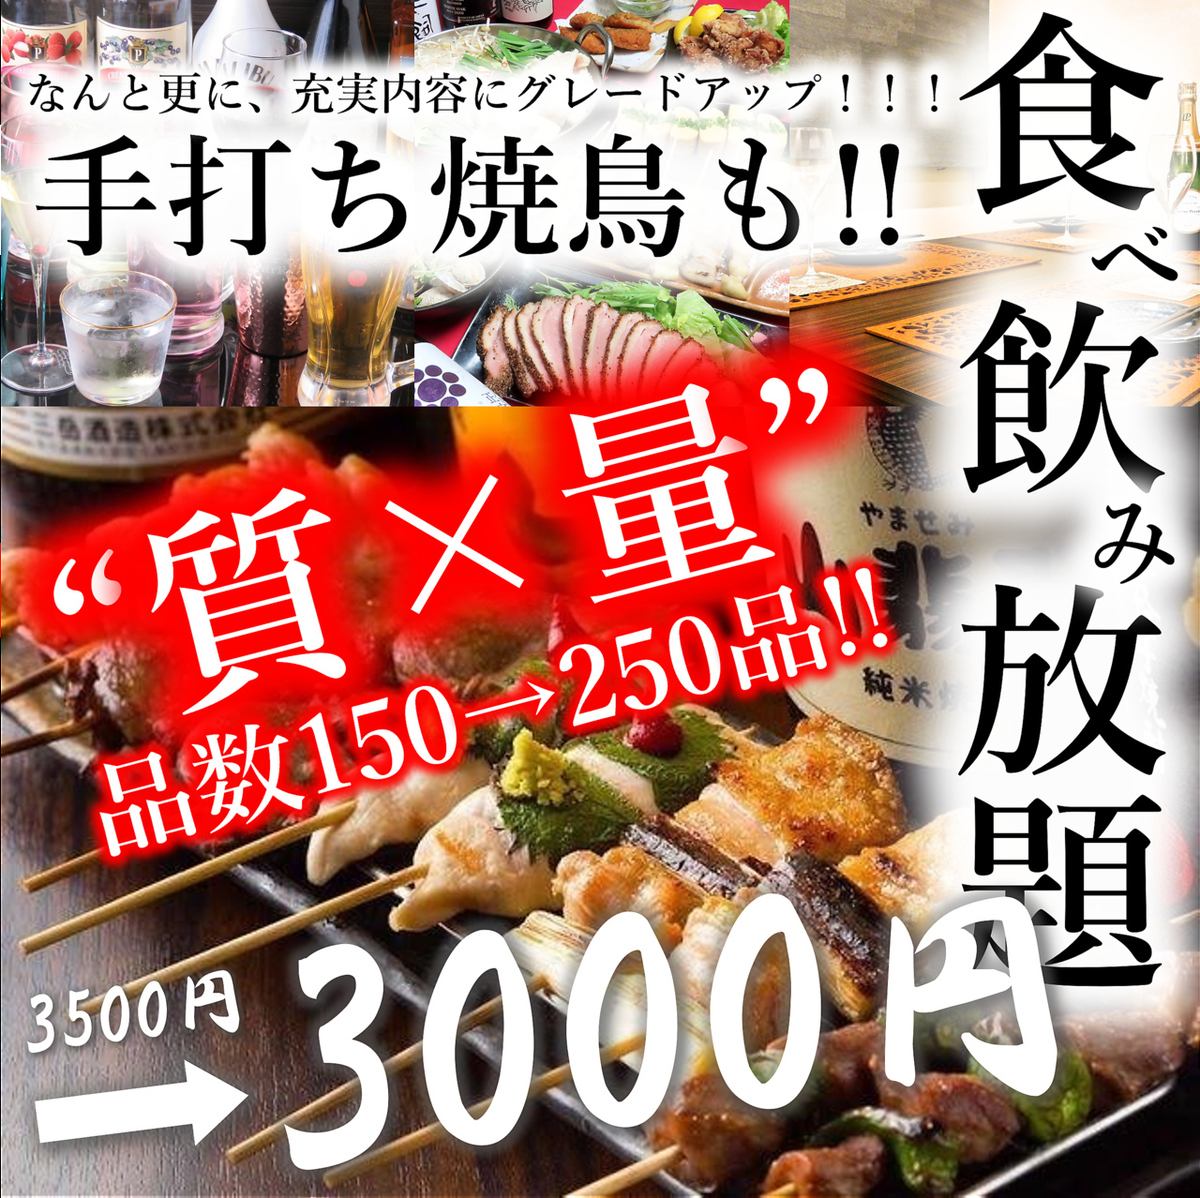 A great value izakaya with all-you-can-eat and all-you-can-drink options! Popular menu items include yakitori and meat sushi.